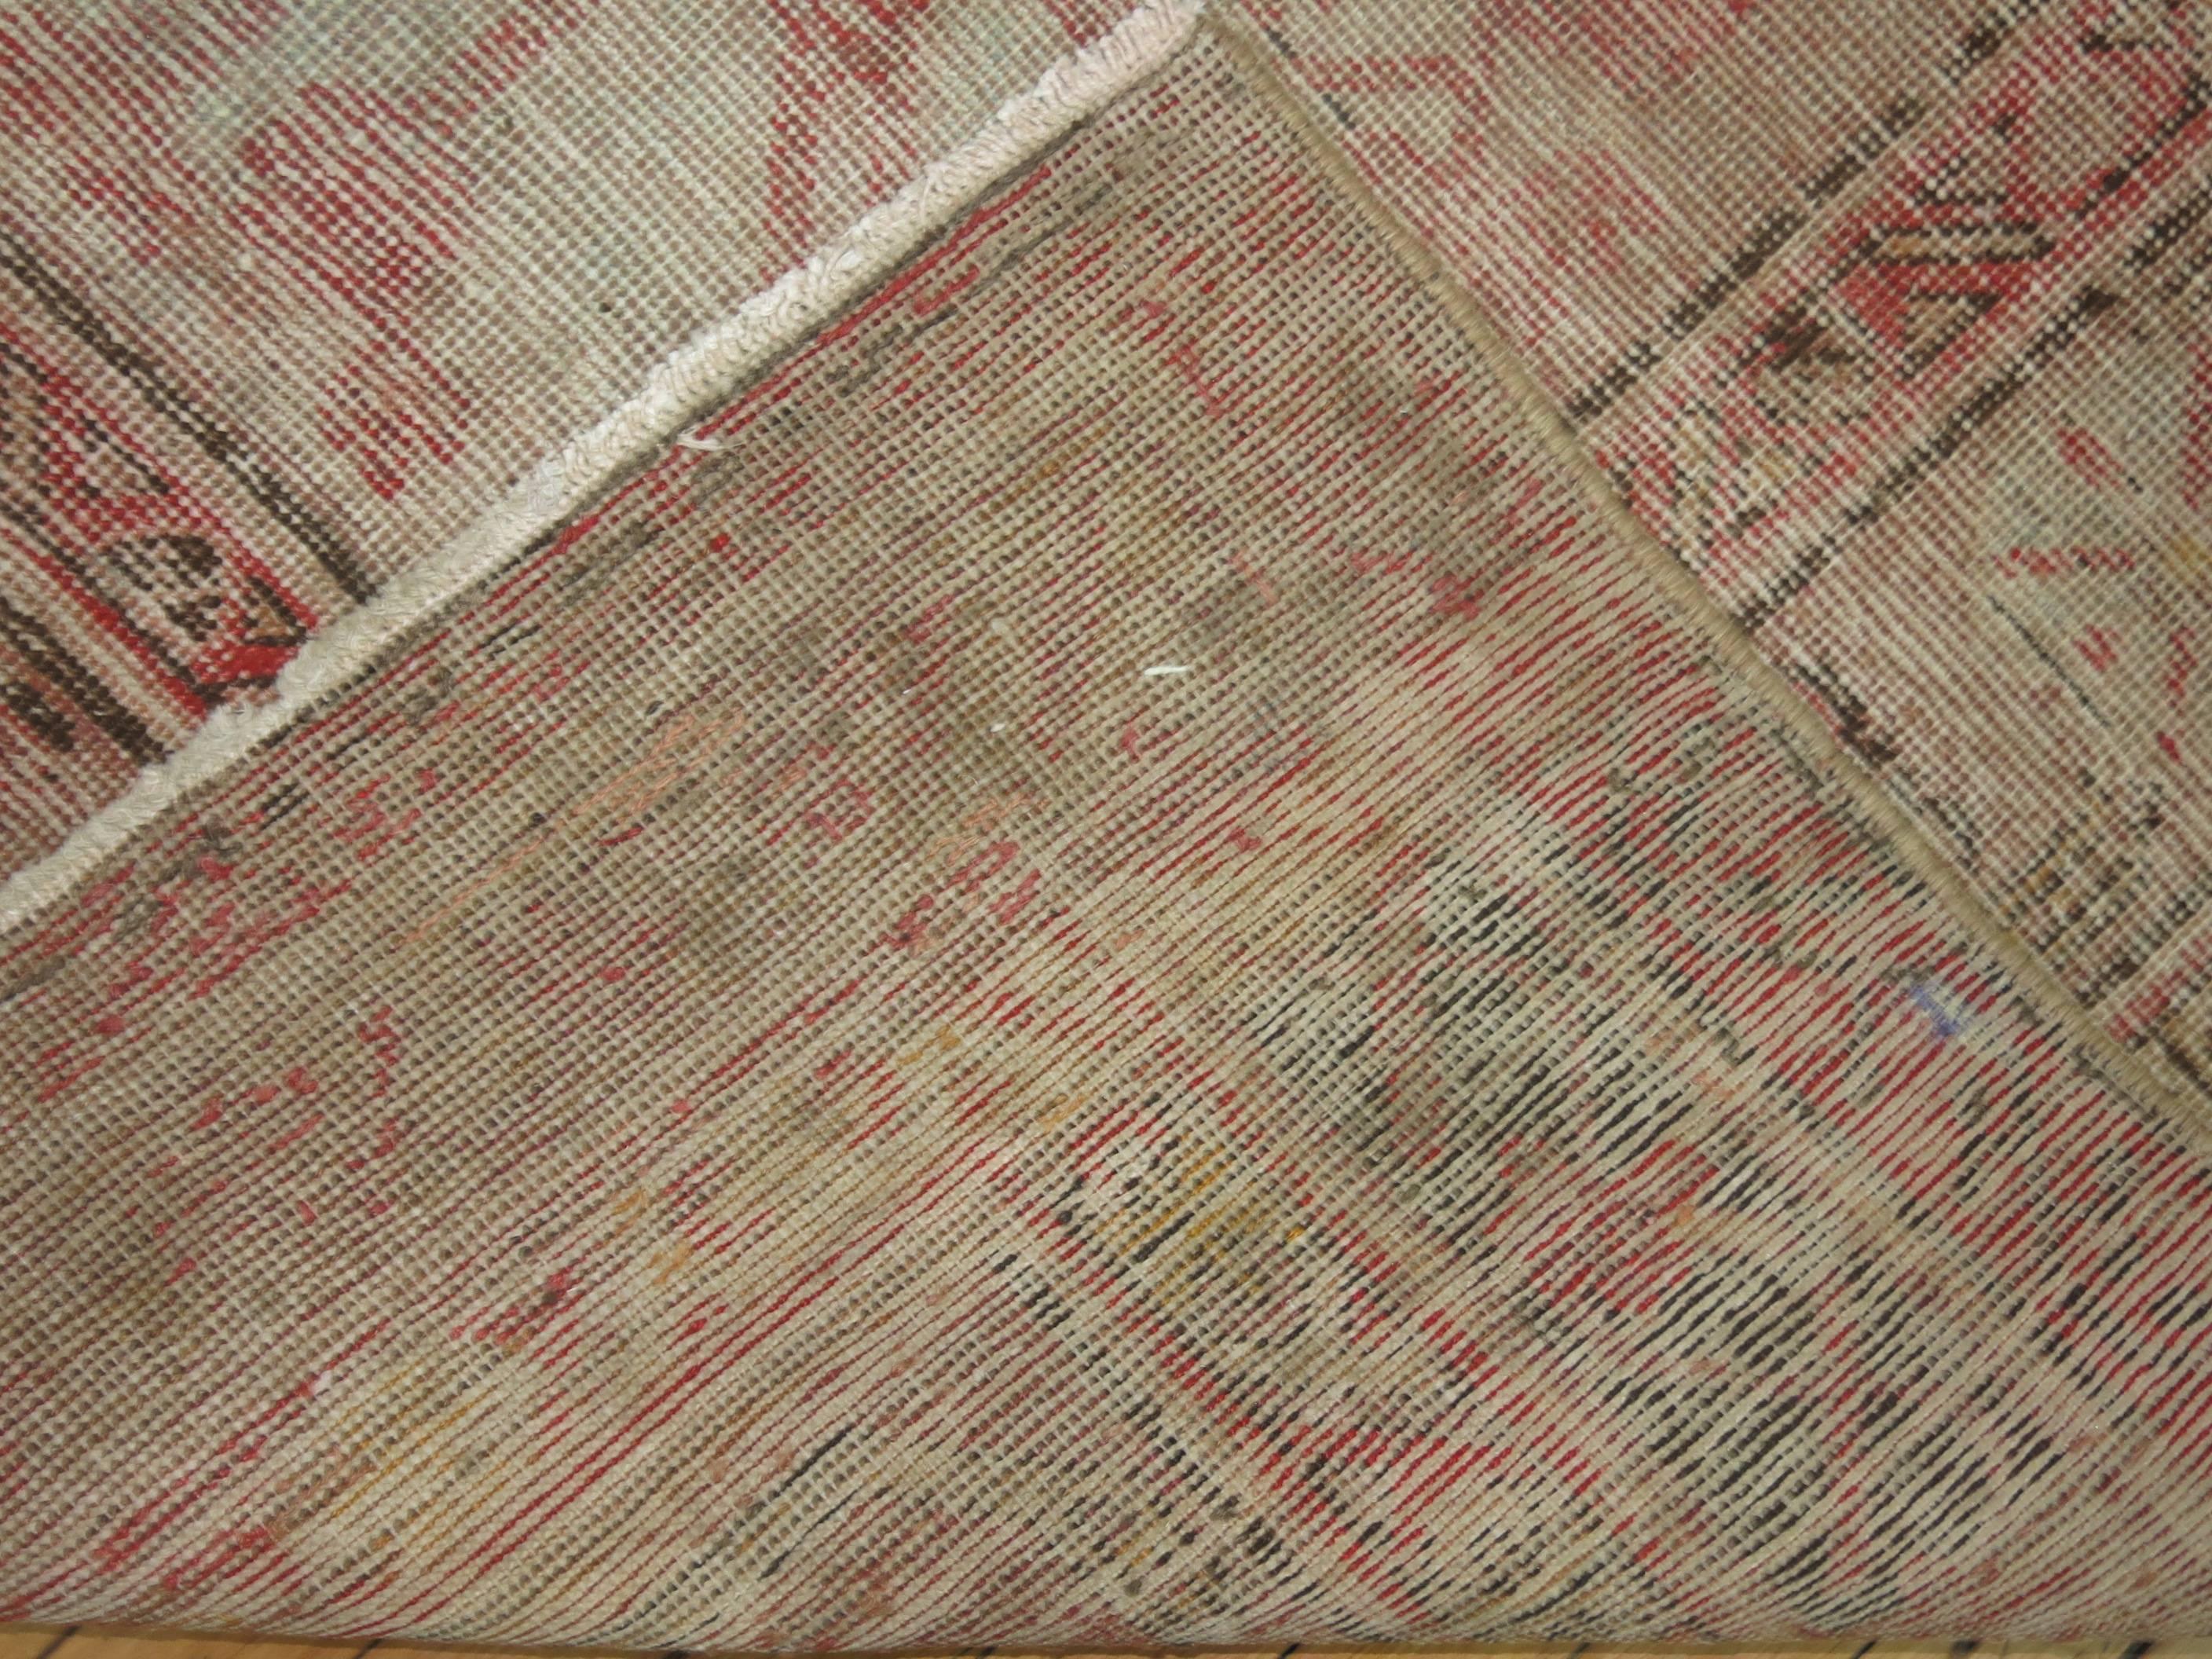 Pomegranate Khotan Shabby Chic Late 19th Century Large Gallery Size Rug For Sale 1